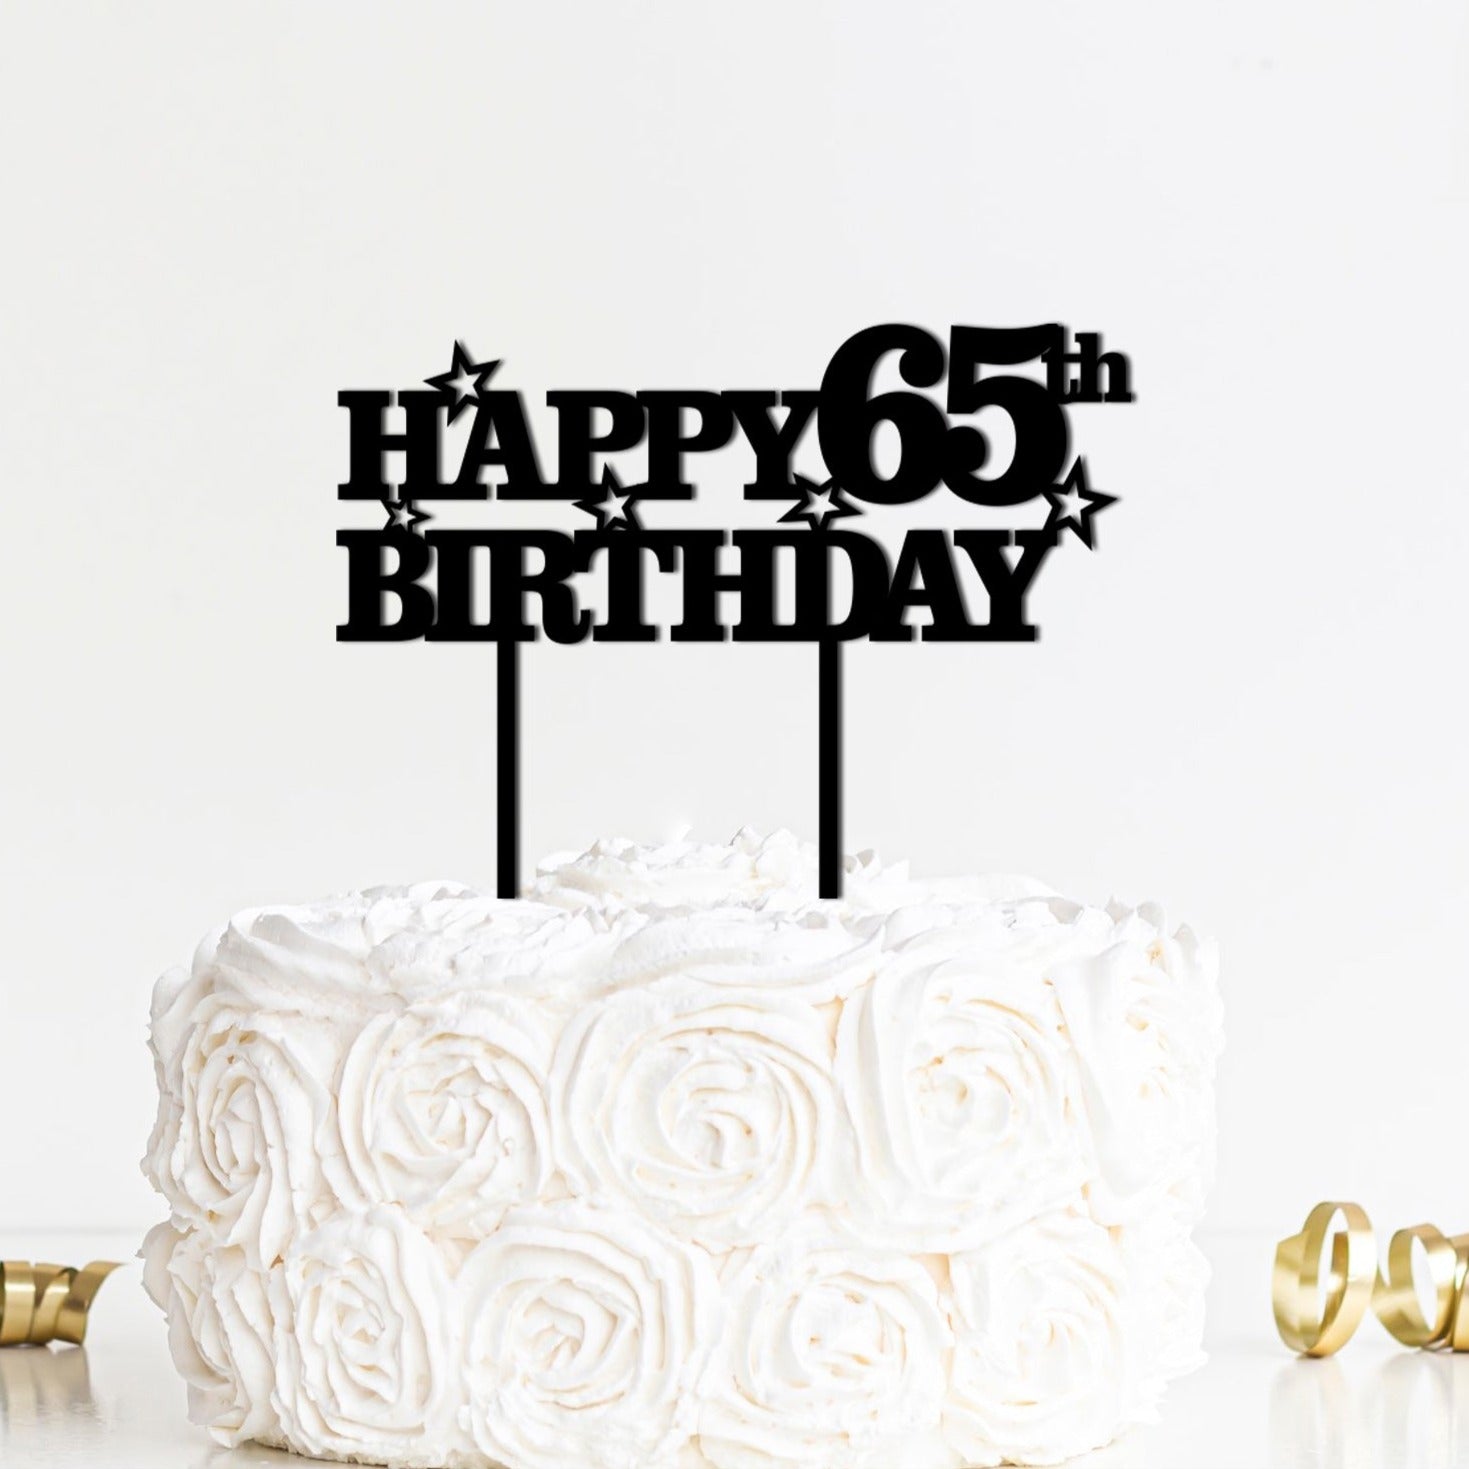 Happy 65th Birthday Cake Topper with Stars